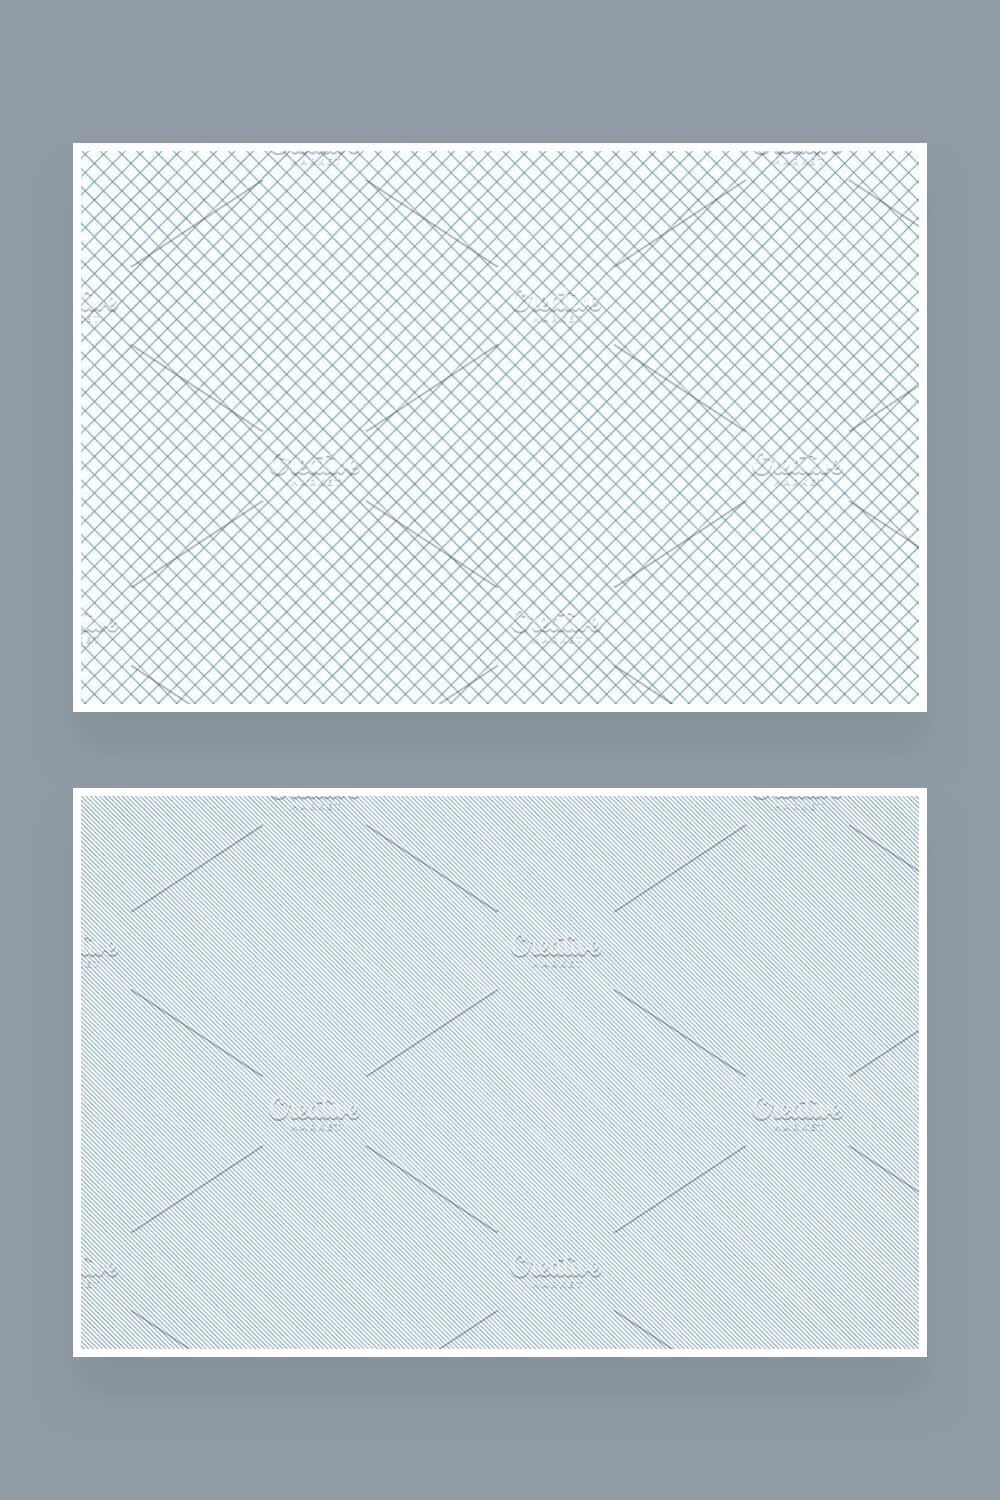 Seamless pattern of paper grid in small rhombuses of gray color.